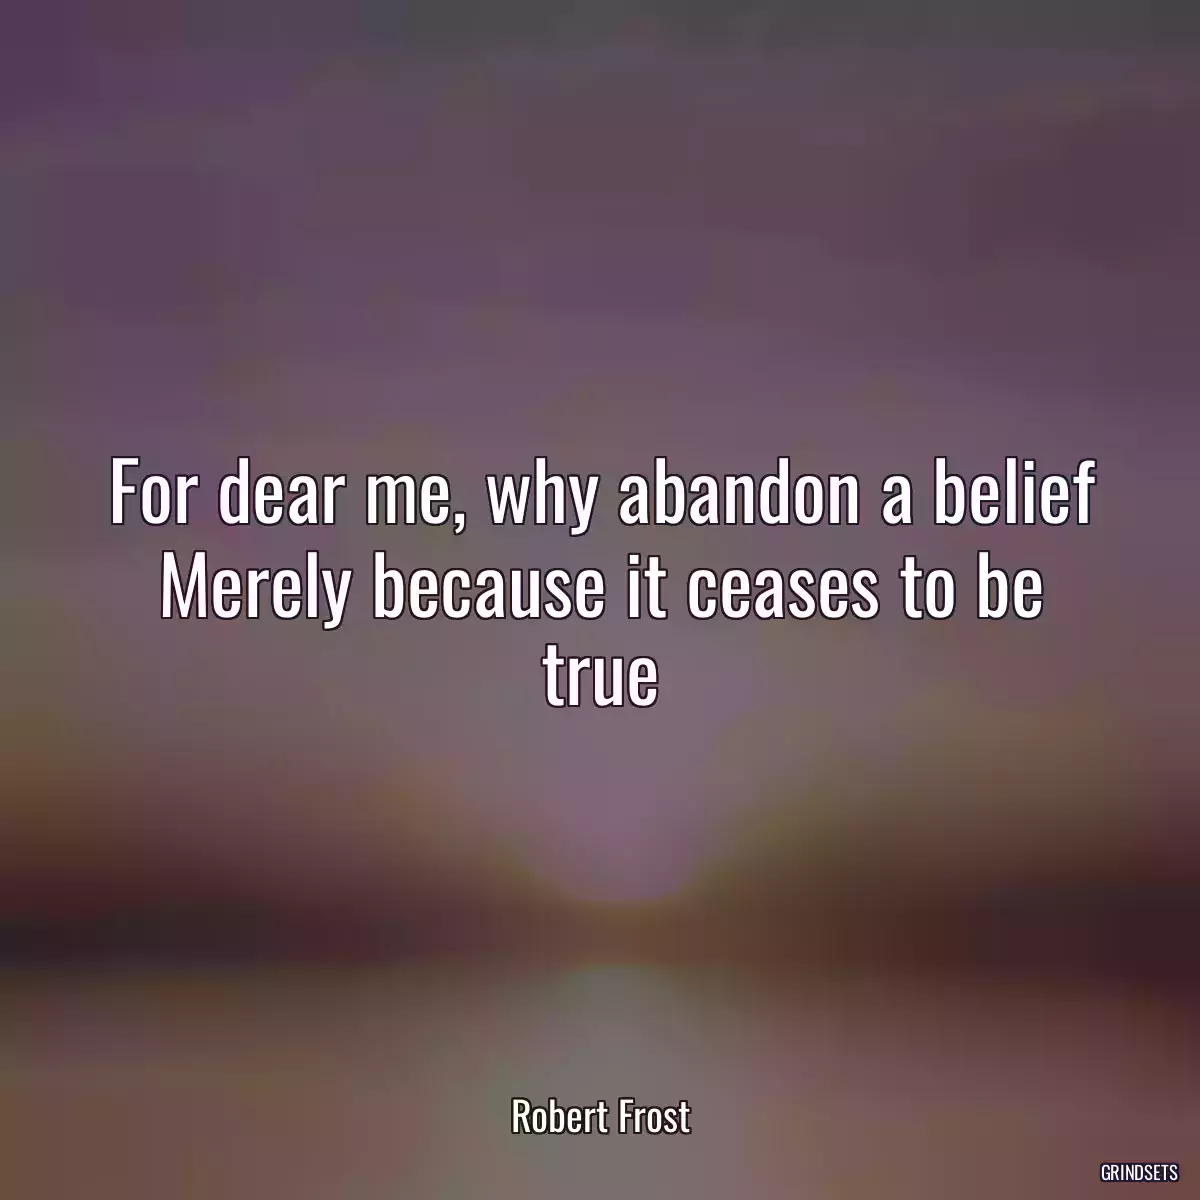 For dear me, why abandon a belief Merely because it ceases to be true